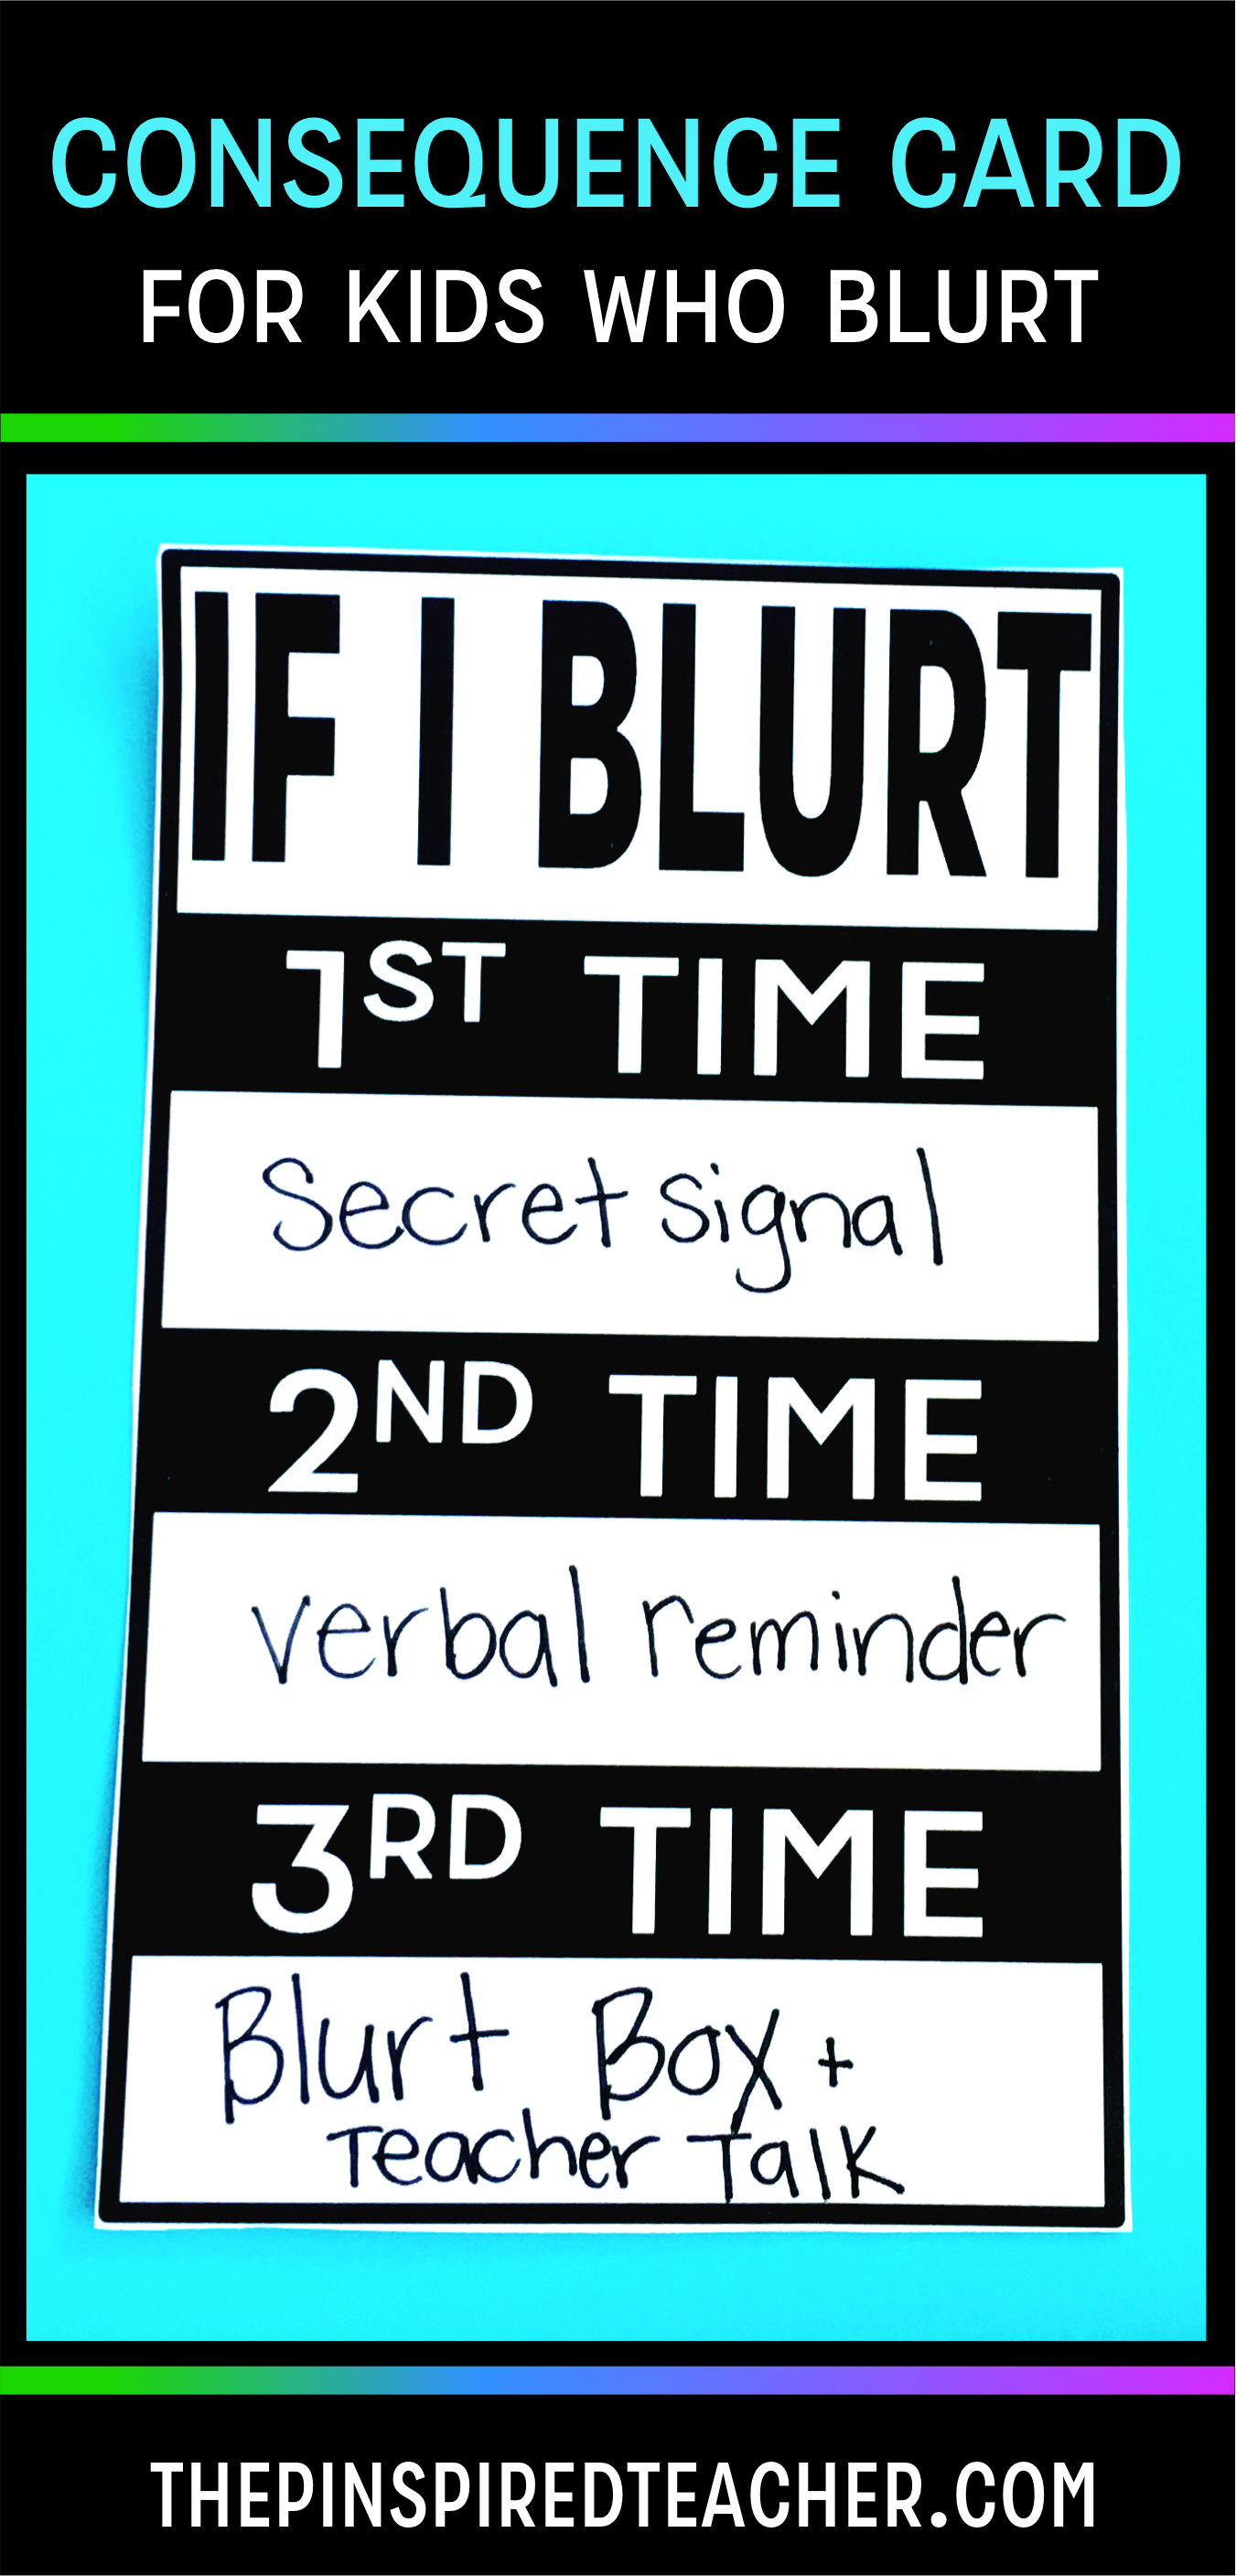 Consequence Card for Kids Who Blurt by The Pinspired Teacher | PBIS | Behavior Consequences for Blurting Out | Blurt Alert | Classroom Management Ideas | Classroom Rules